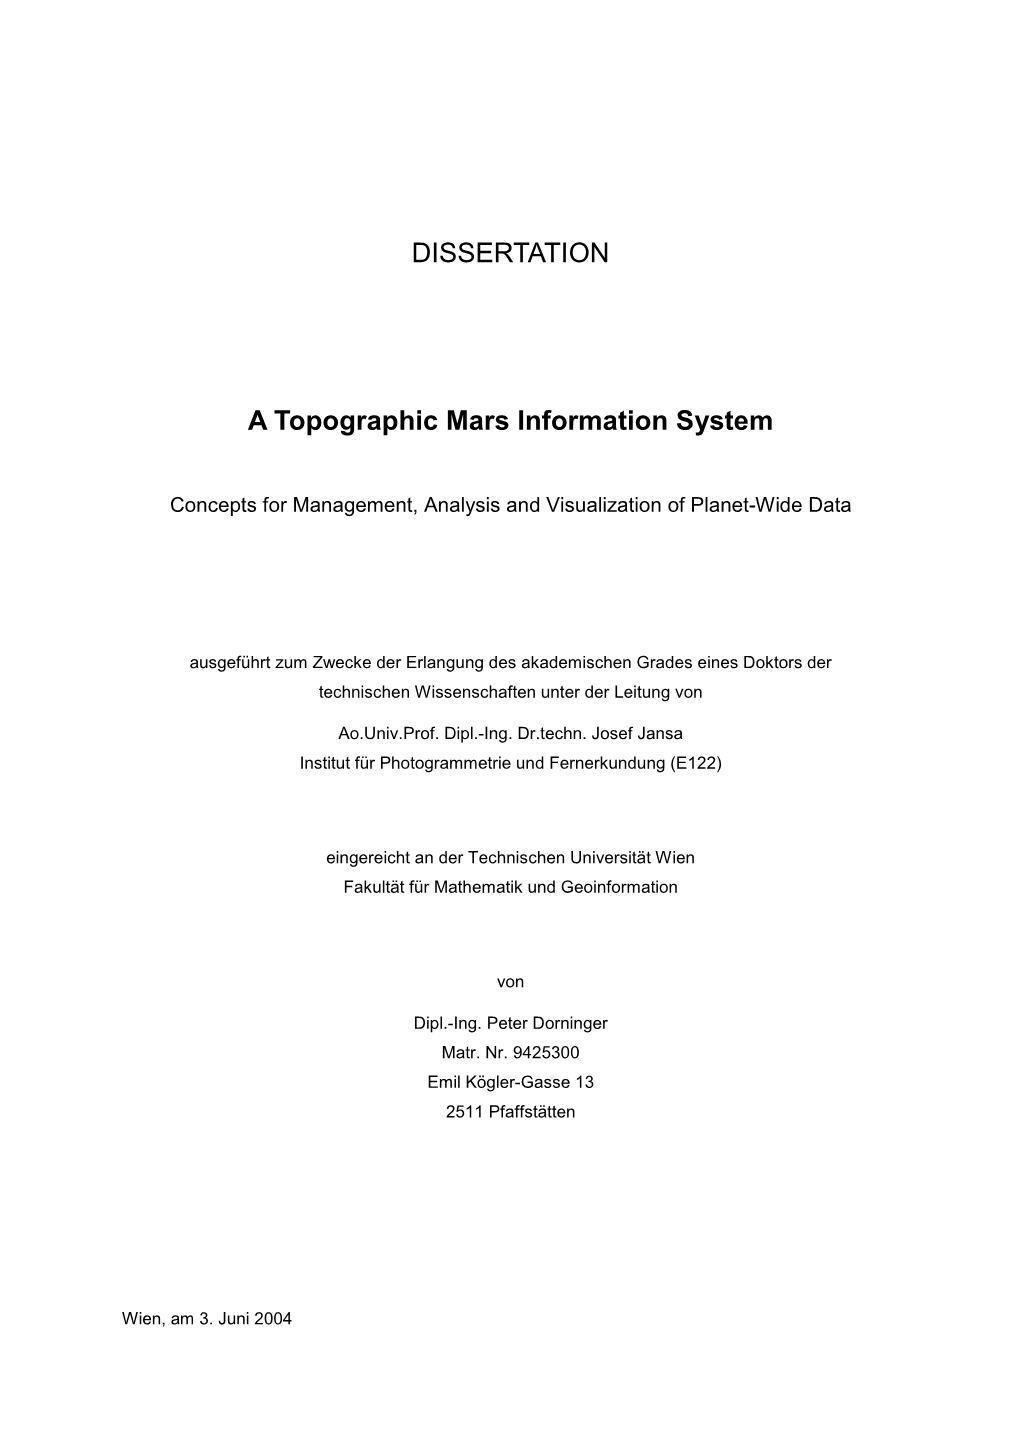 DISSERTATION a Topographic Mars Information System